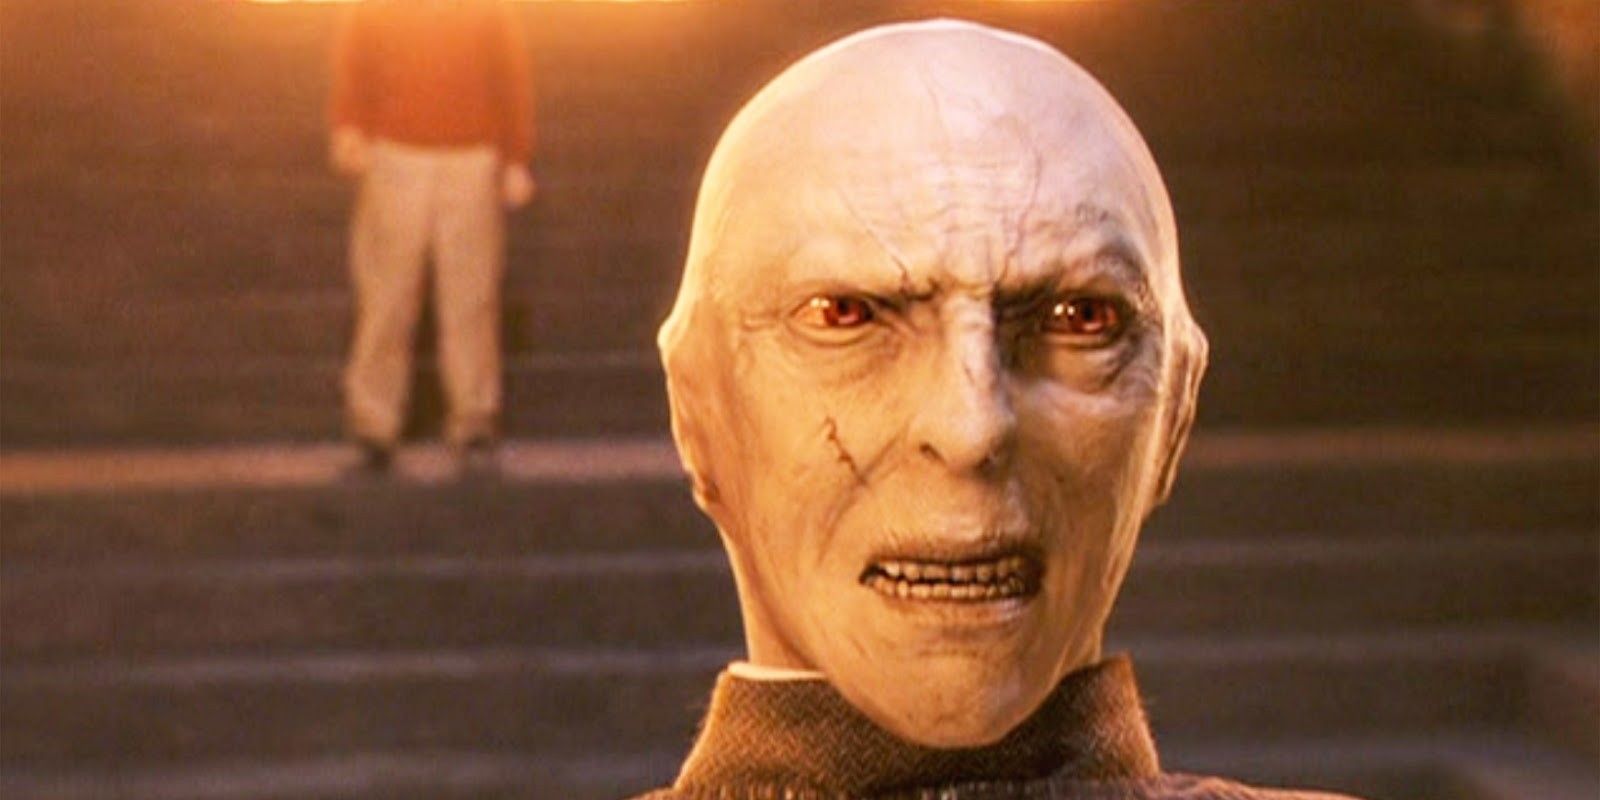 Richard Bremmer as Lord Voldemort appearing on the back of Quirrell's head in Harry Potter